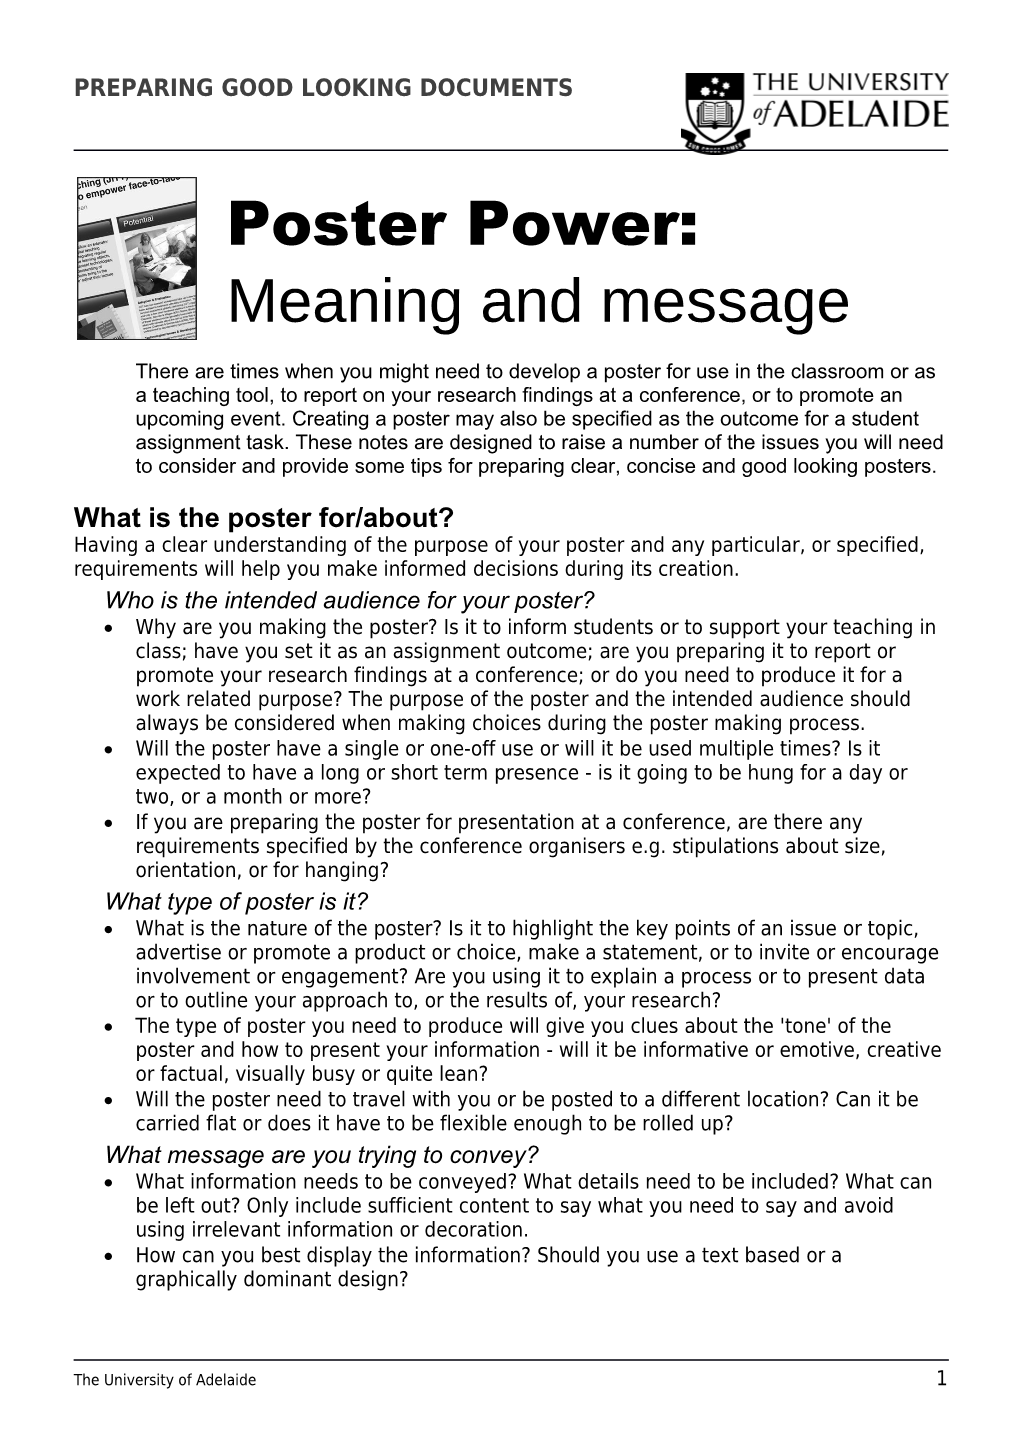 Poster Power: Meaning and Message